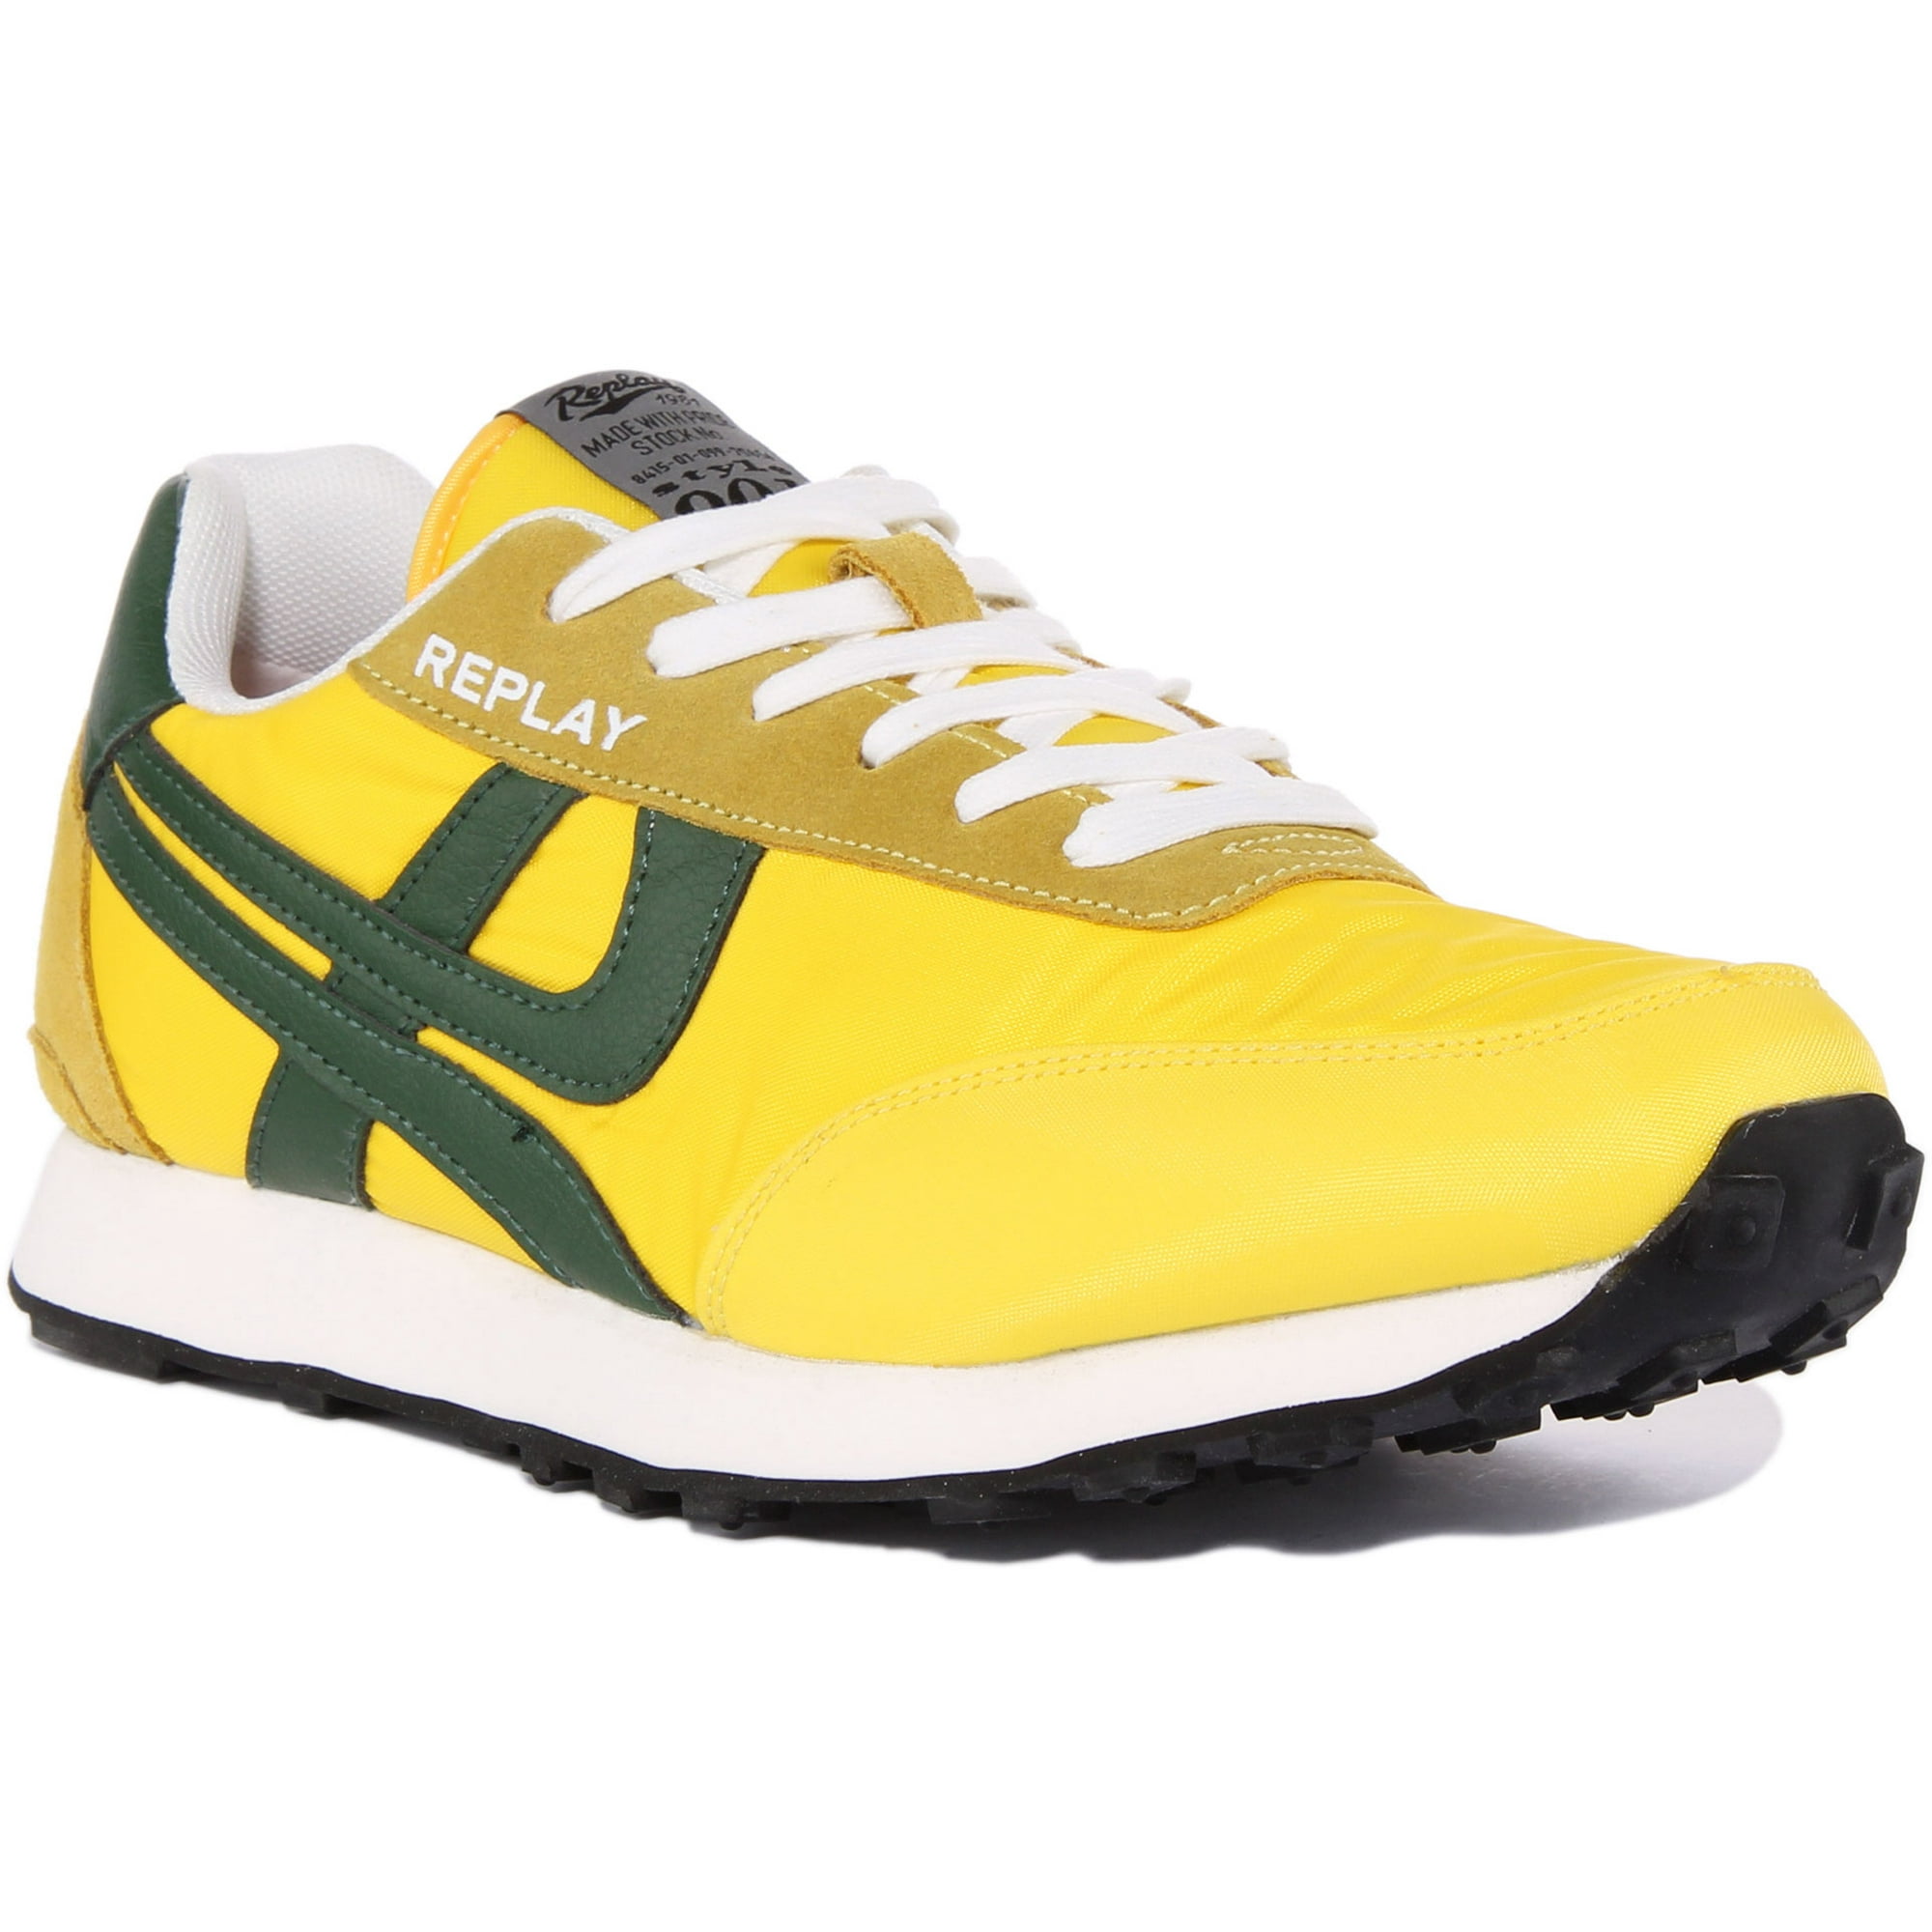 Replay Rude Vintage Men's Lace Up Casual Trainers In Yellow Size 12.5 